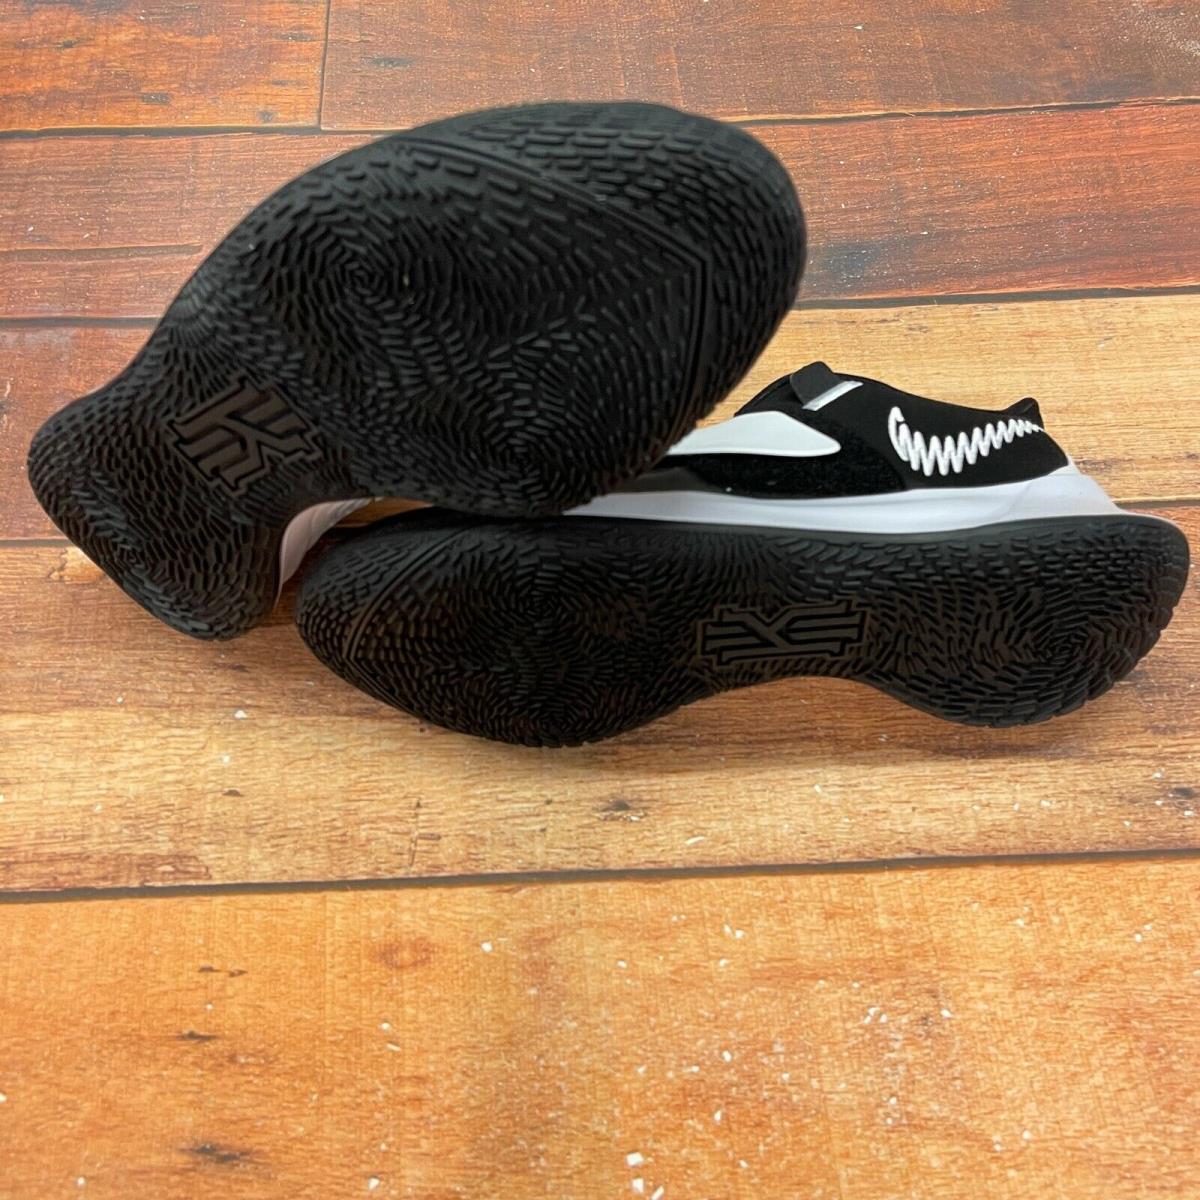 Nike shoes Kyrie Low - Black 4